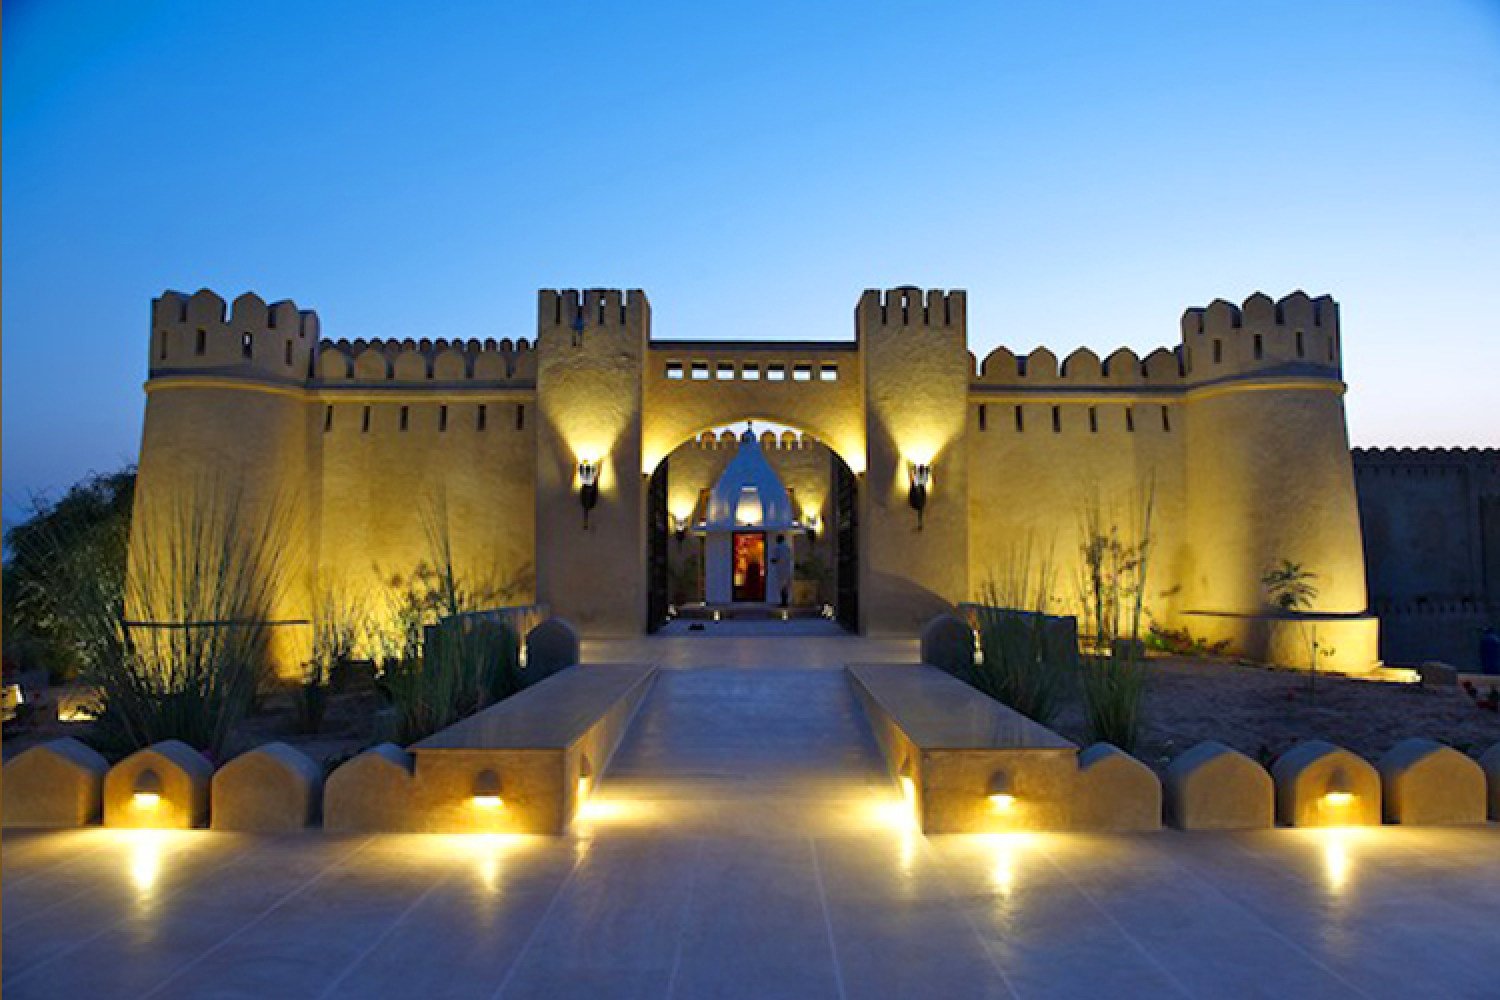 explore rajasthan in luxury: the tribes and vibes of india’s desert oasis – stay at sujan jawai, sujan serai and mihir garh resorts to explore the golden city of jaisalmer and the windswept sands of jawai